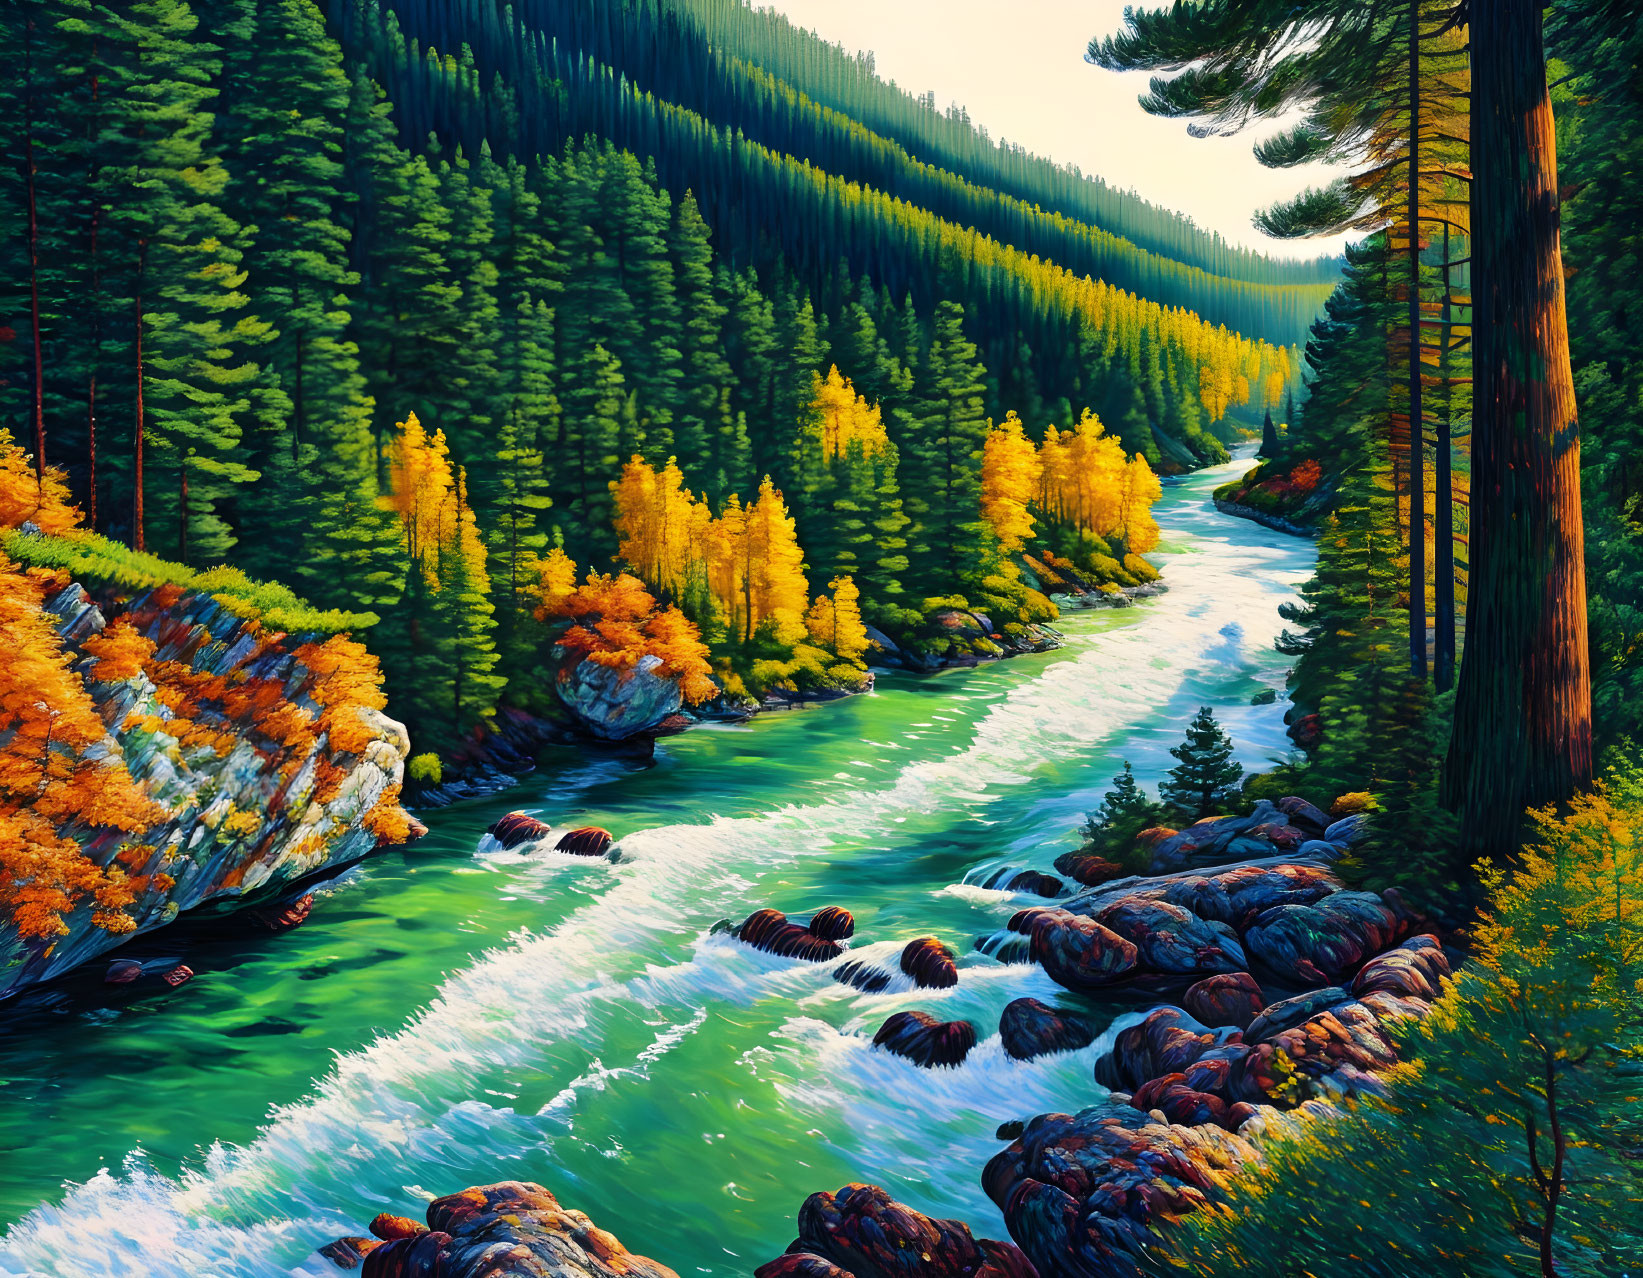 Scenic river in autumn forest with green pines